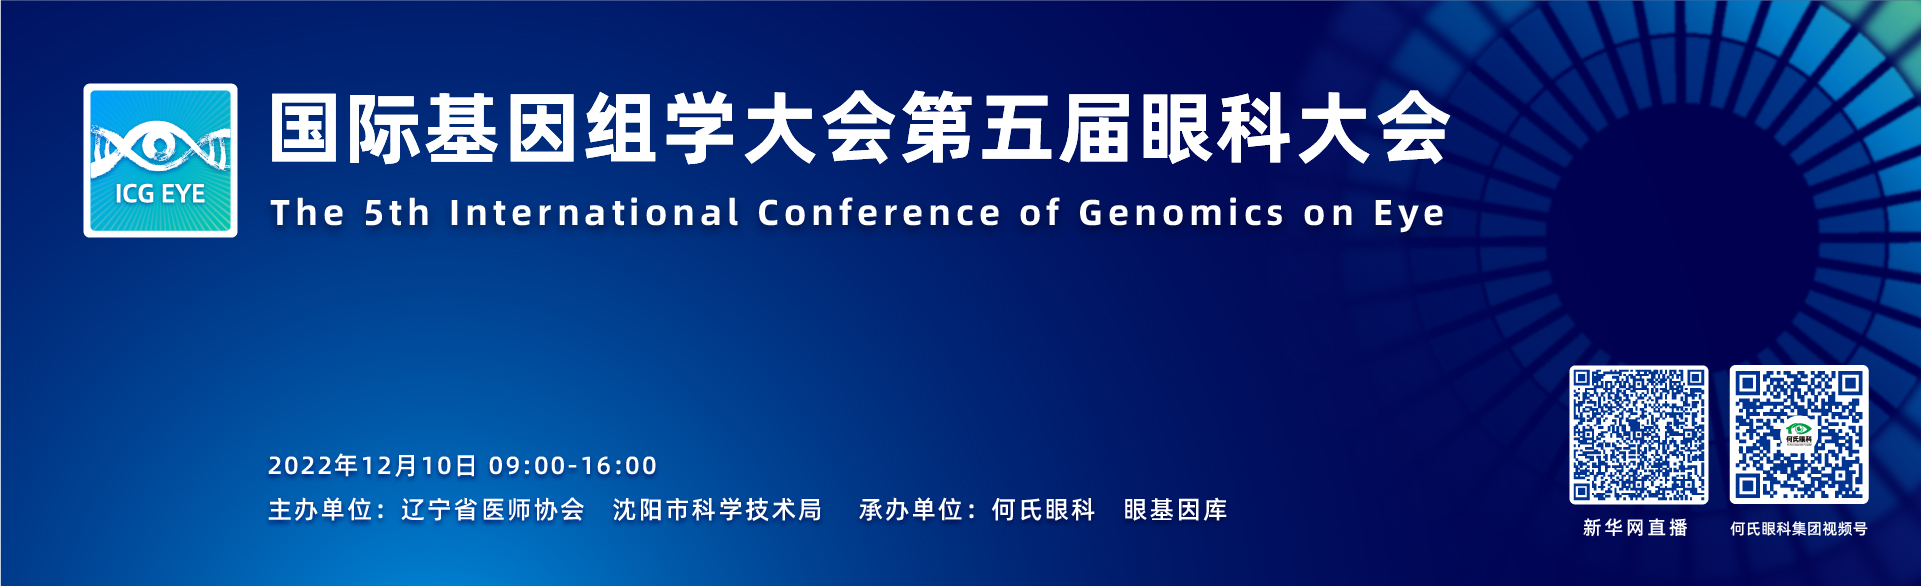 The International Conference on Genomics Annual Meeting kicked off on Dec 10